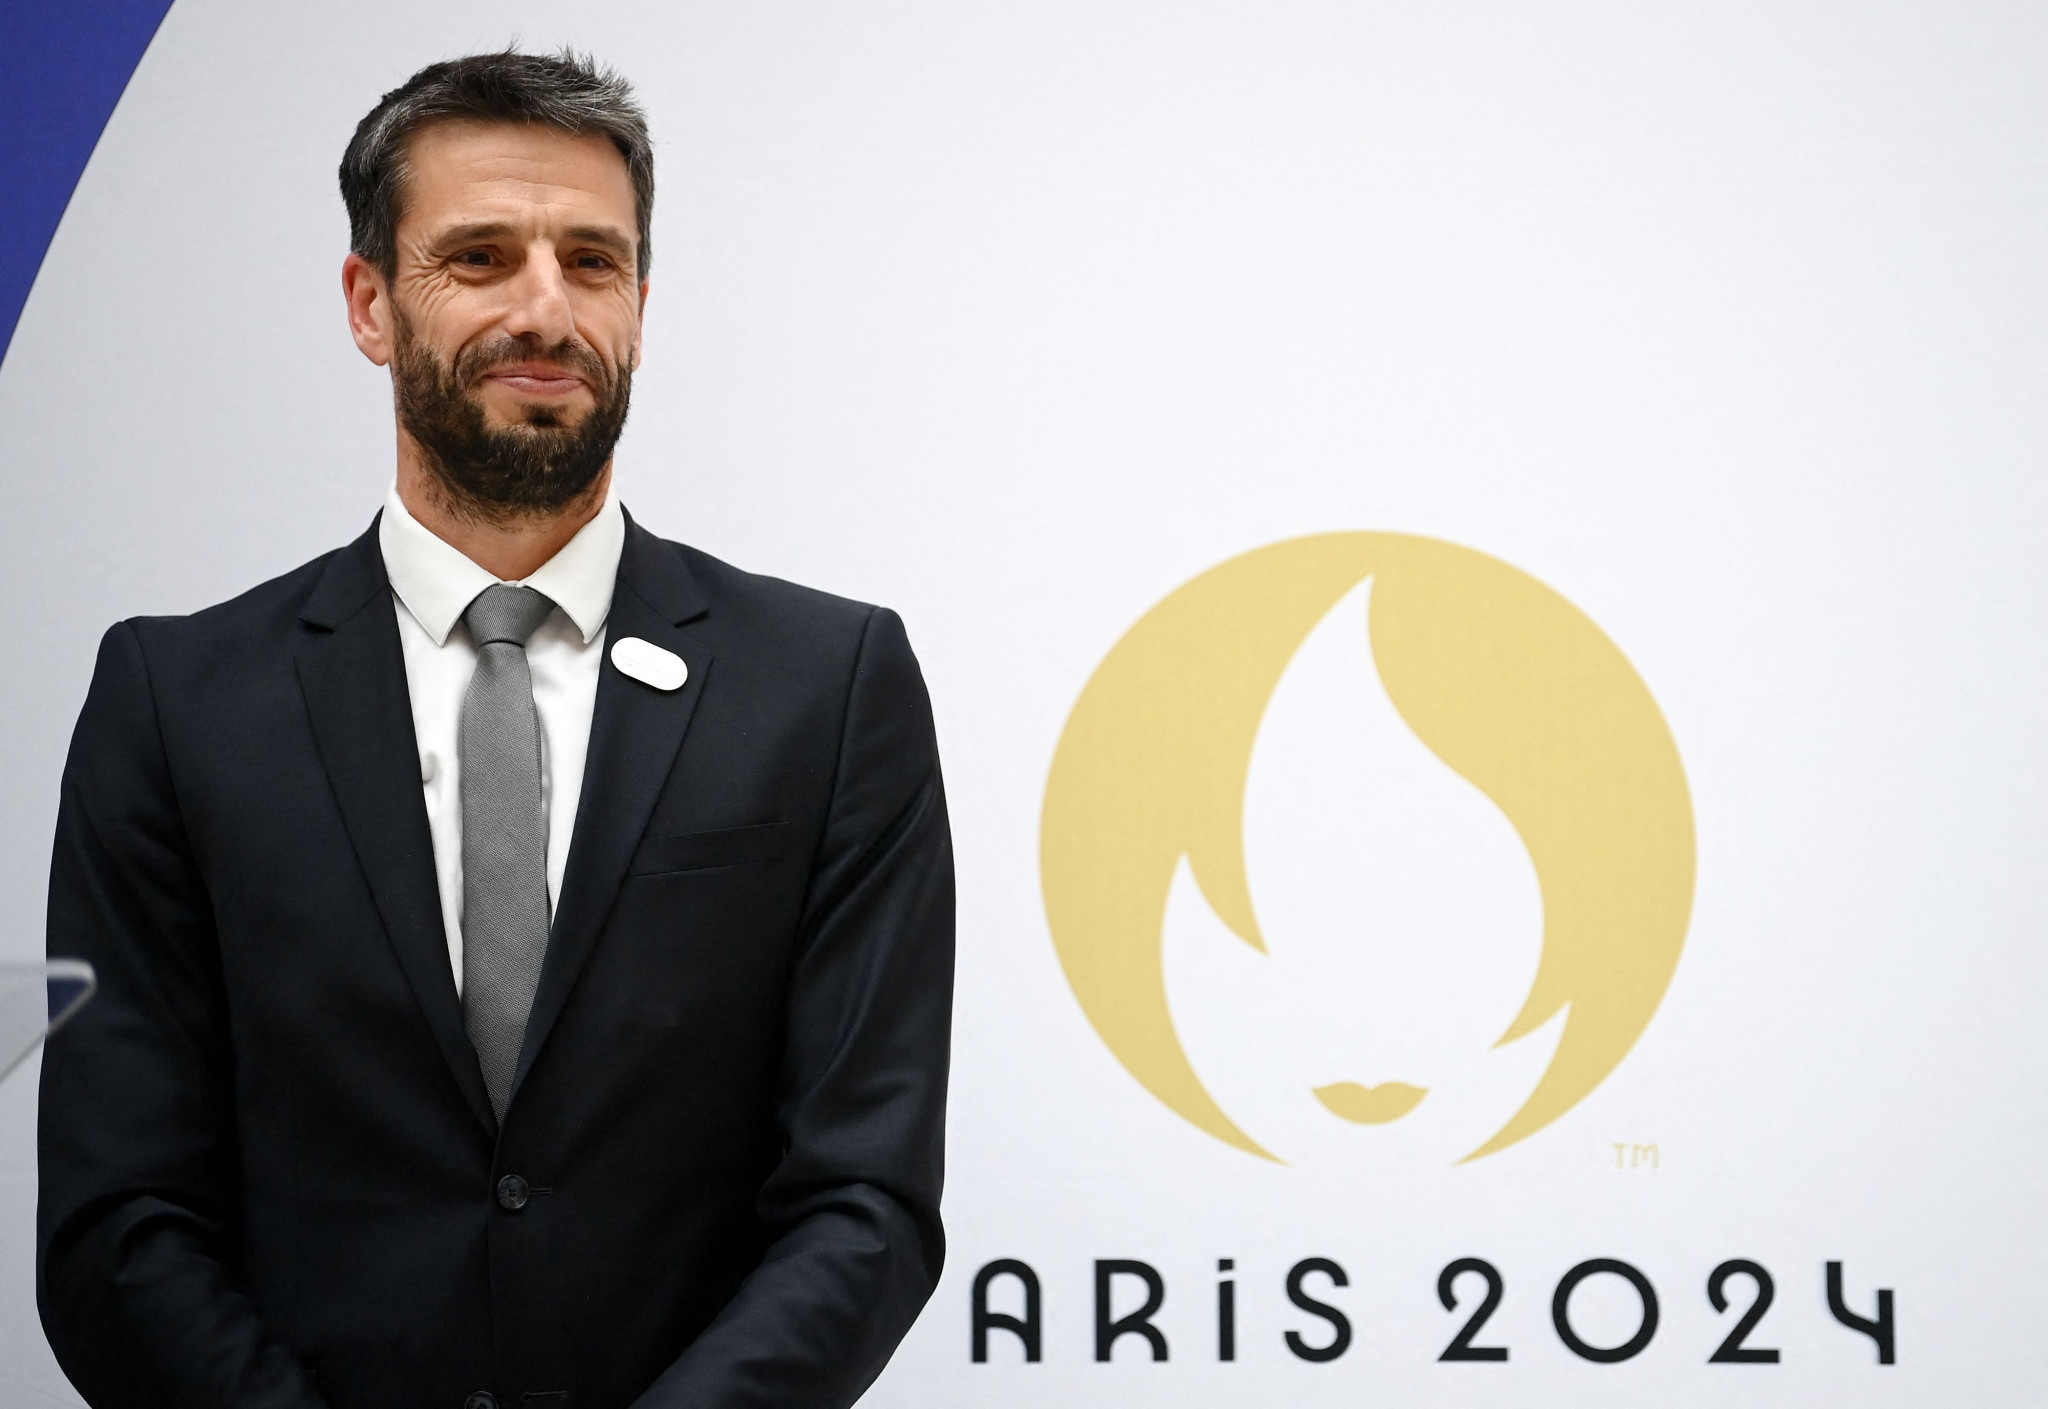 Paris 2024 President Tony Estanguet has said he hopes that the Torch Relays will shine a light on the 